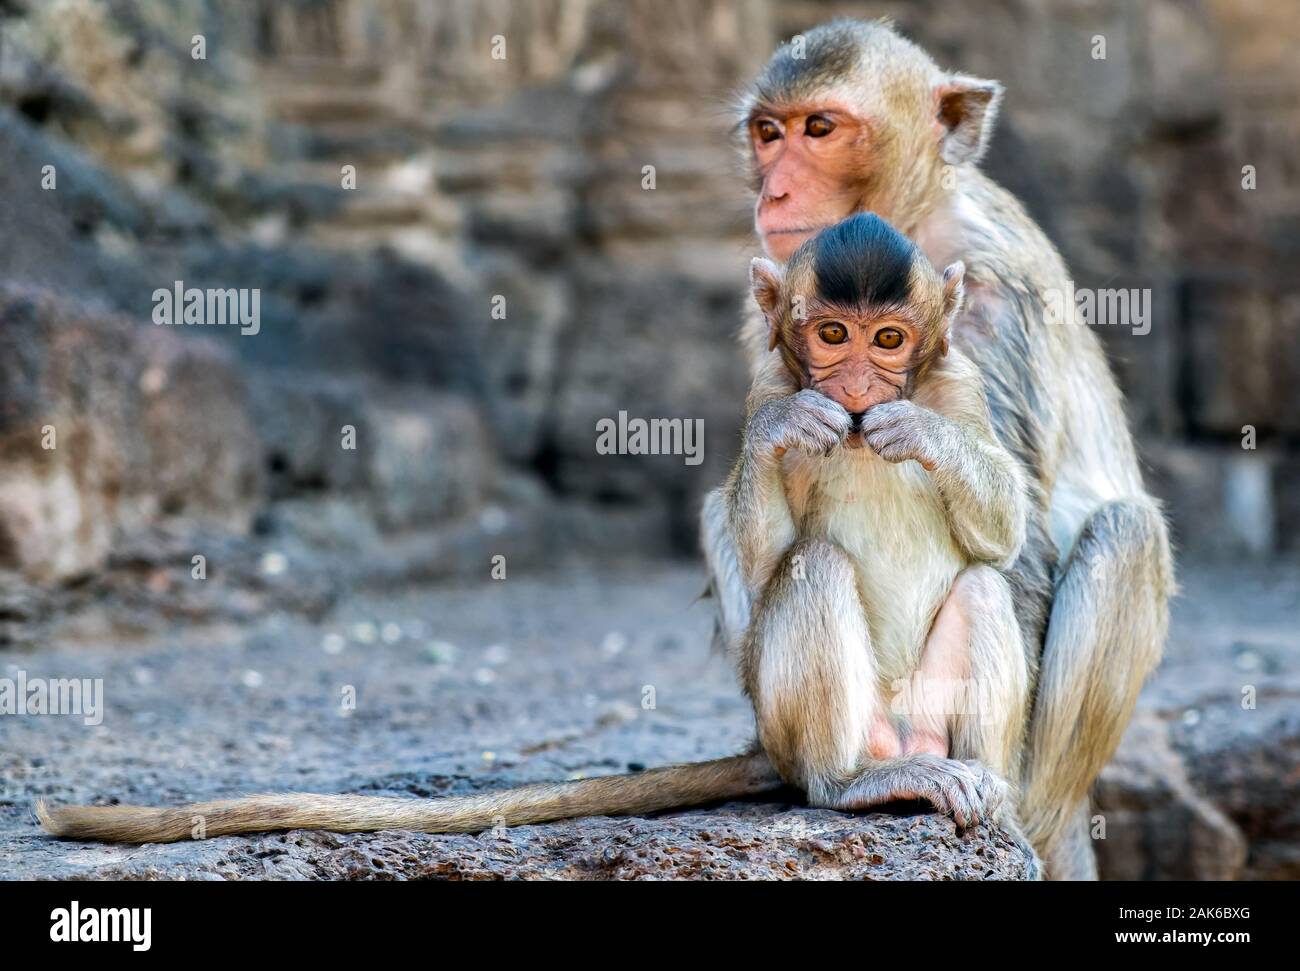 Young monkey with mom in temple looking camera portrait Stock Photo